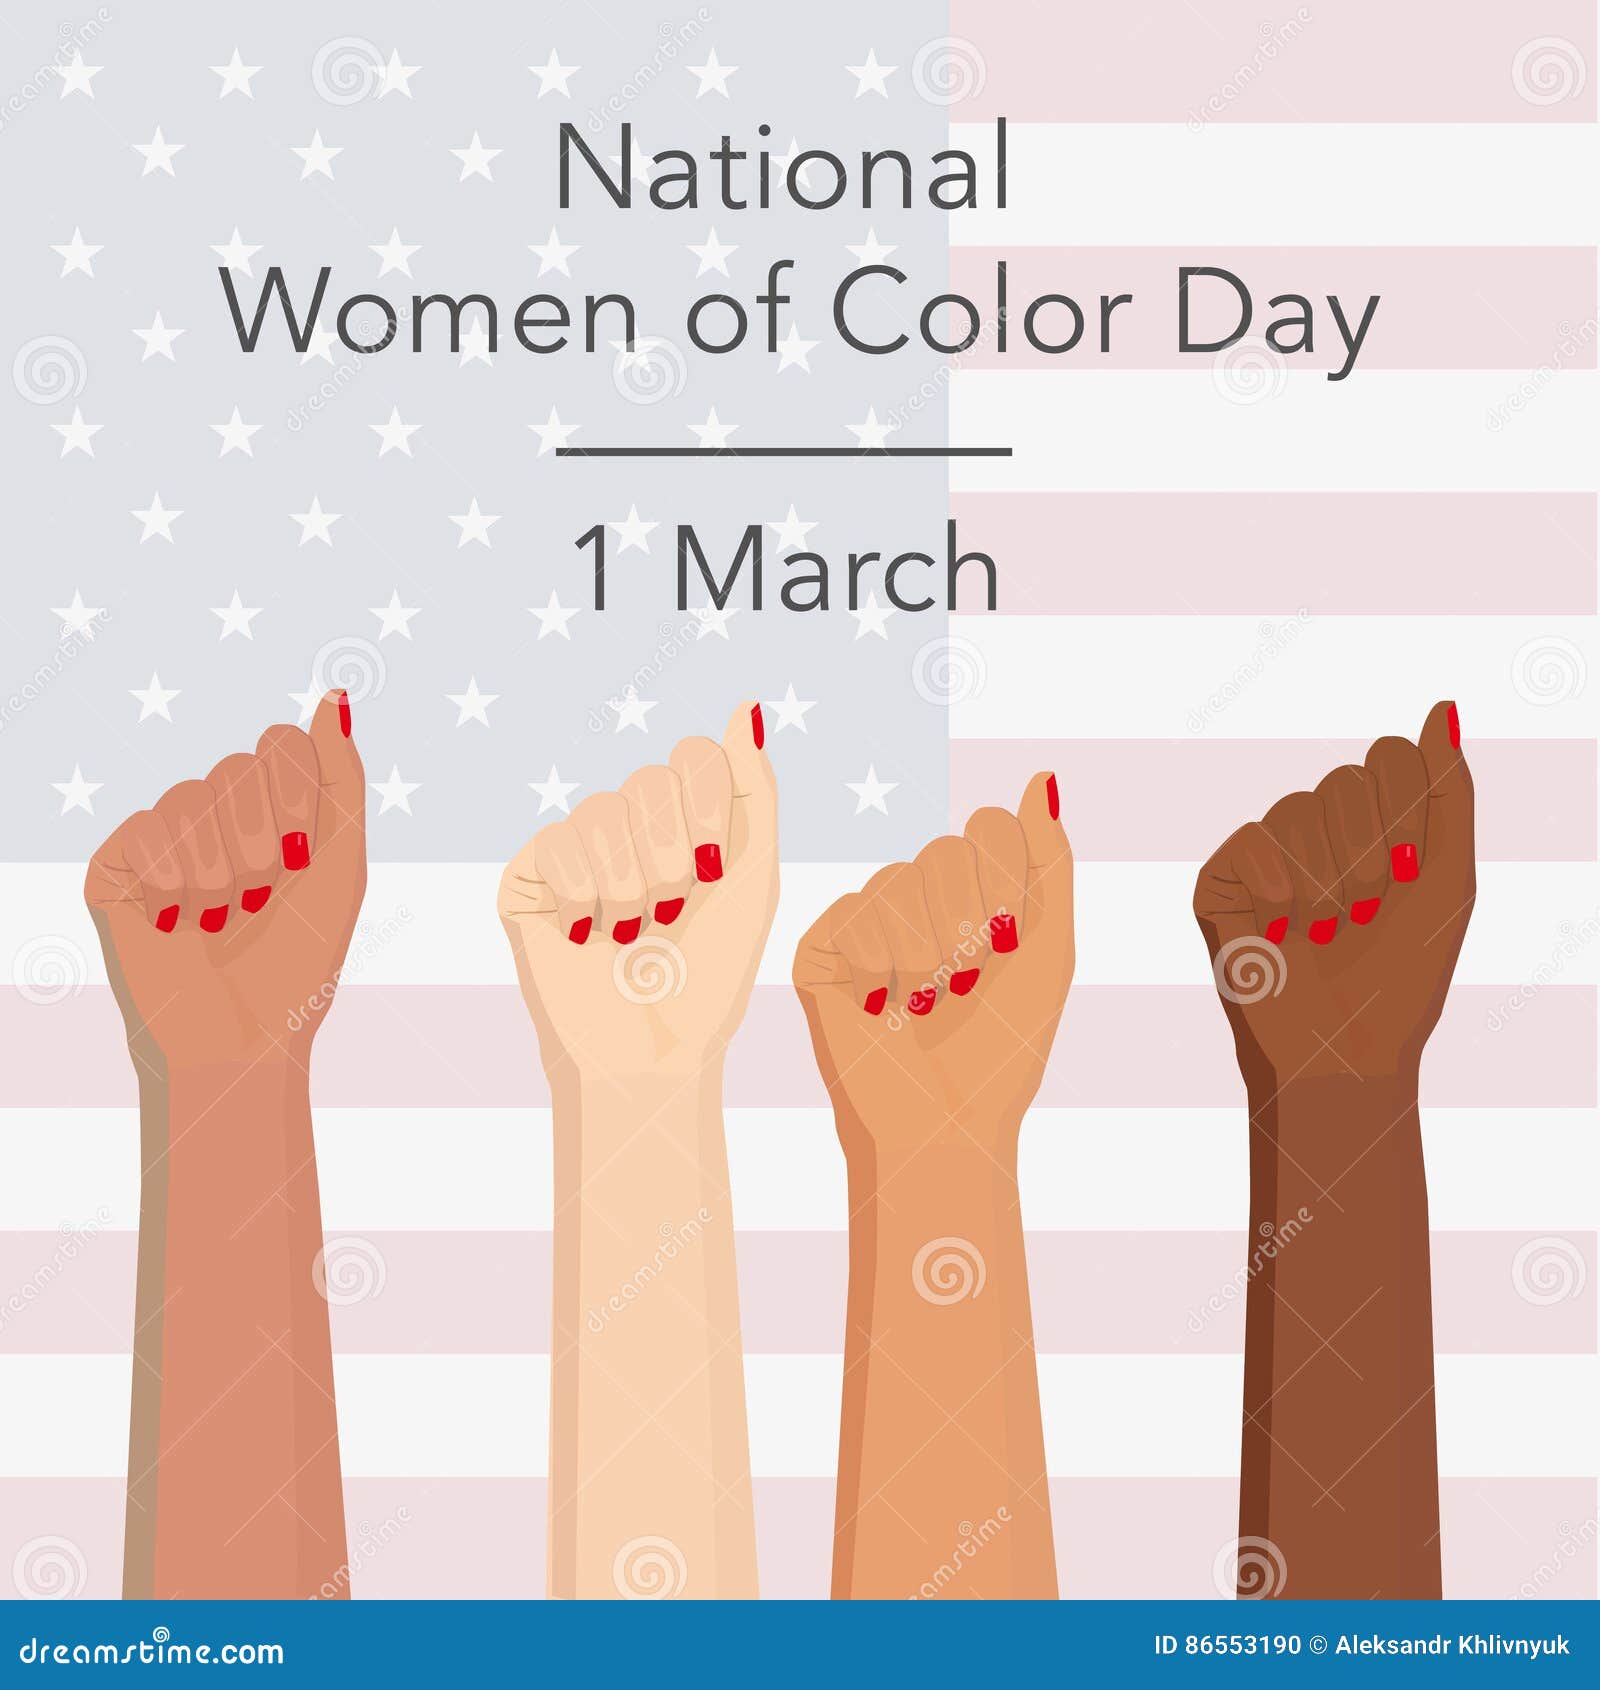 National Women of Color Day